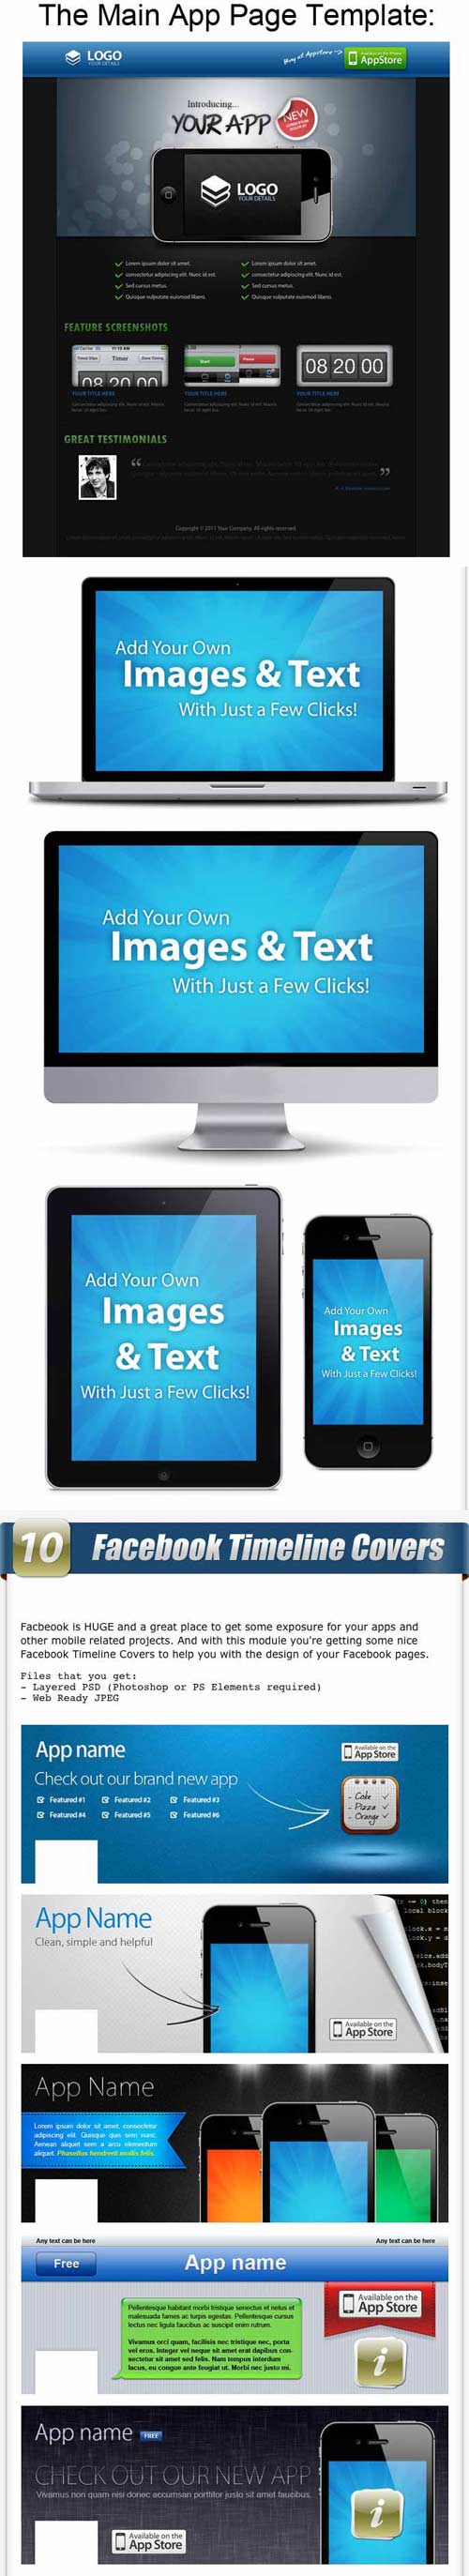 Mobile Graphics Toolkit - Premium design files for your mobile projects